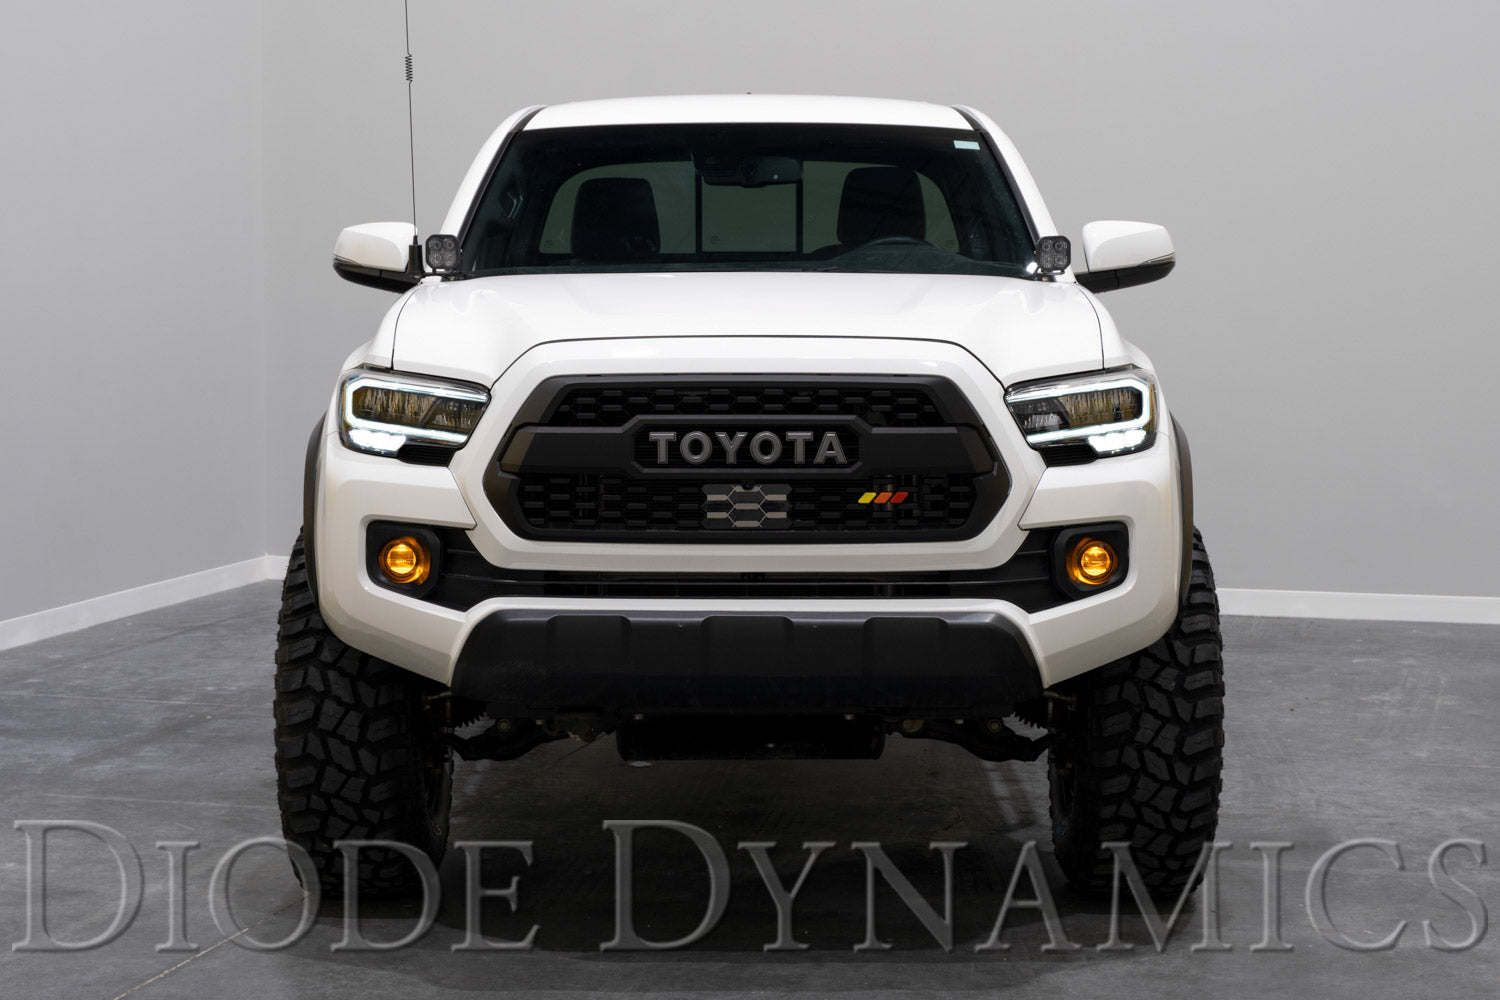 Elite Series Fog Lamps for 2013-2021 Toyota Tacoma Pair Yellow 3000K Diode Dynamics